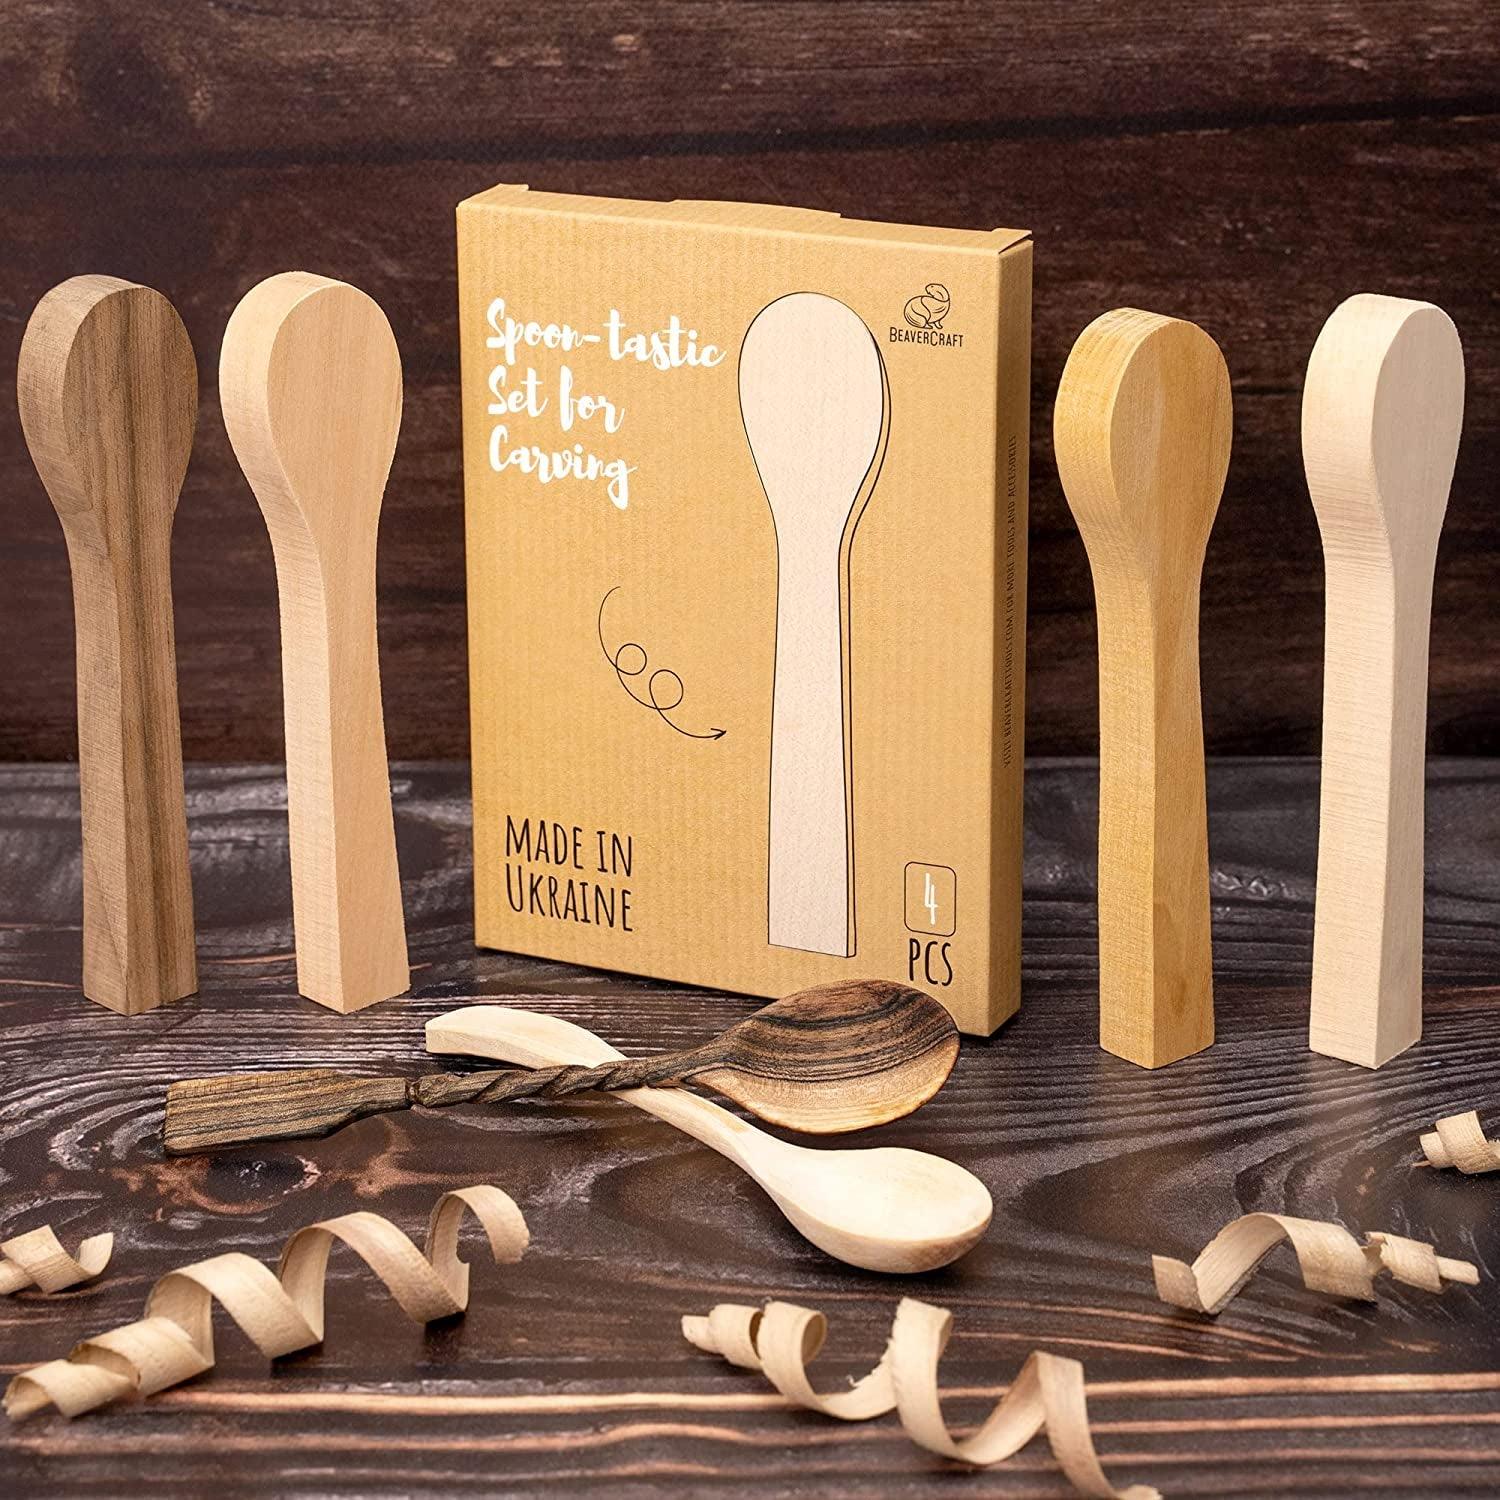 Wood Carving Spoon Blank Unfinished Wood Carving Spoon Carving Kit Wooden Blank Spoon - WoodArtSupply